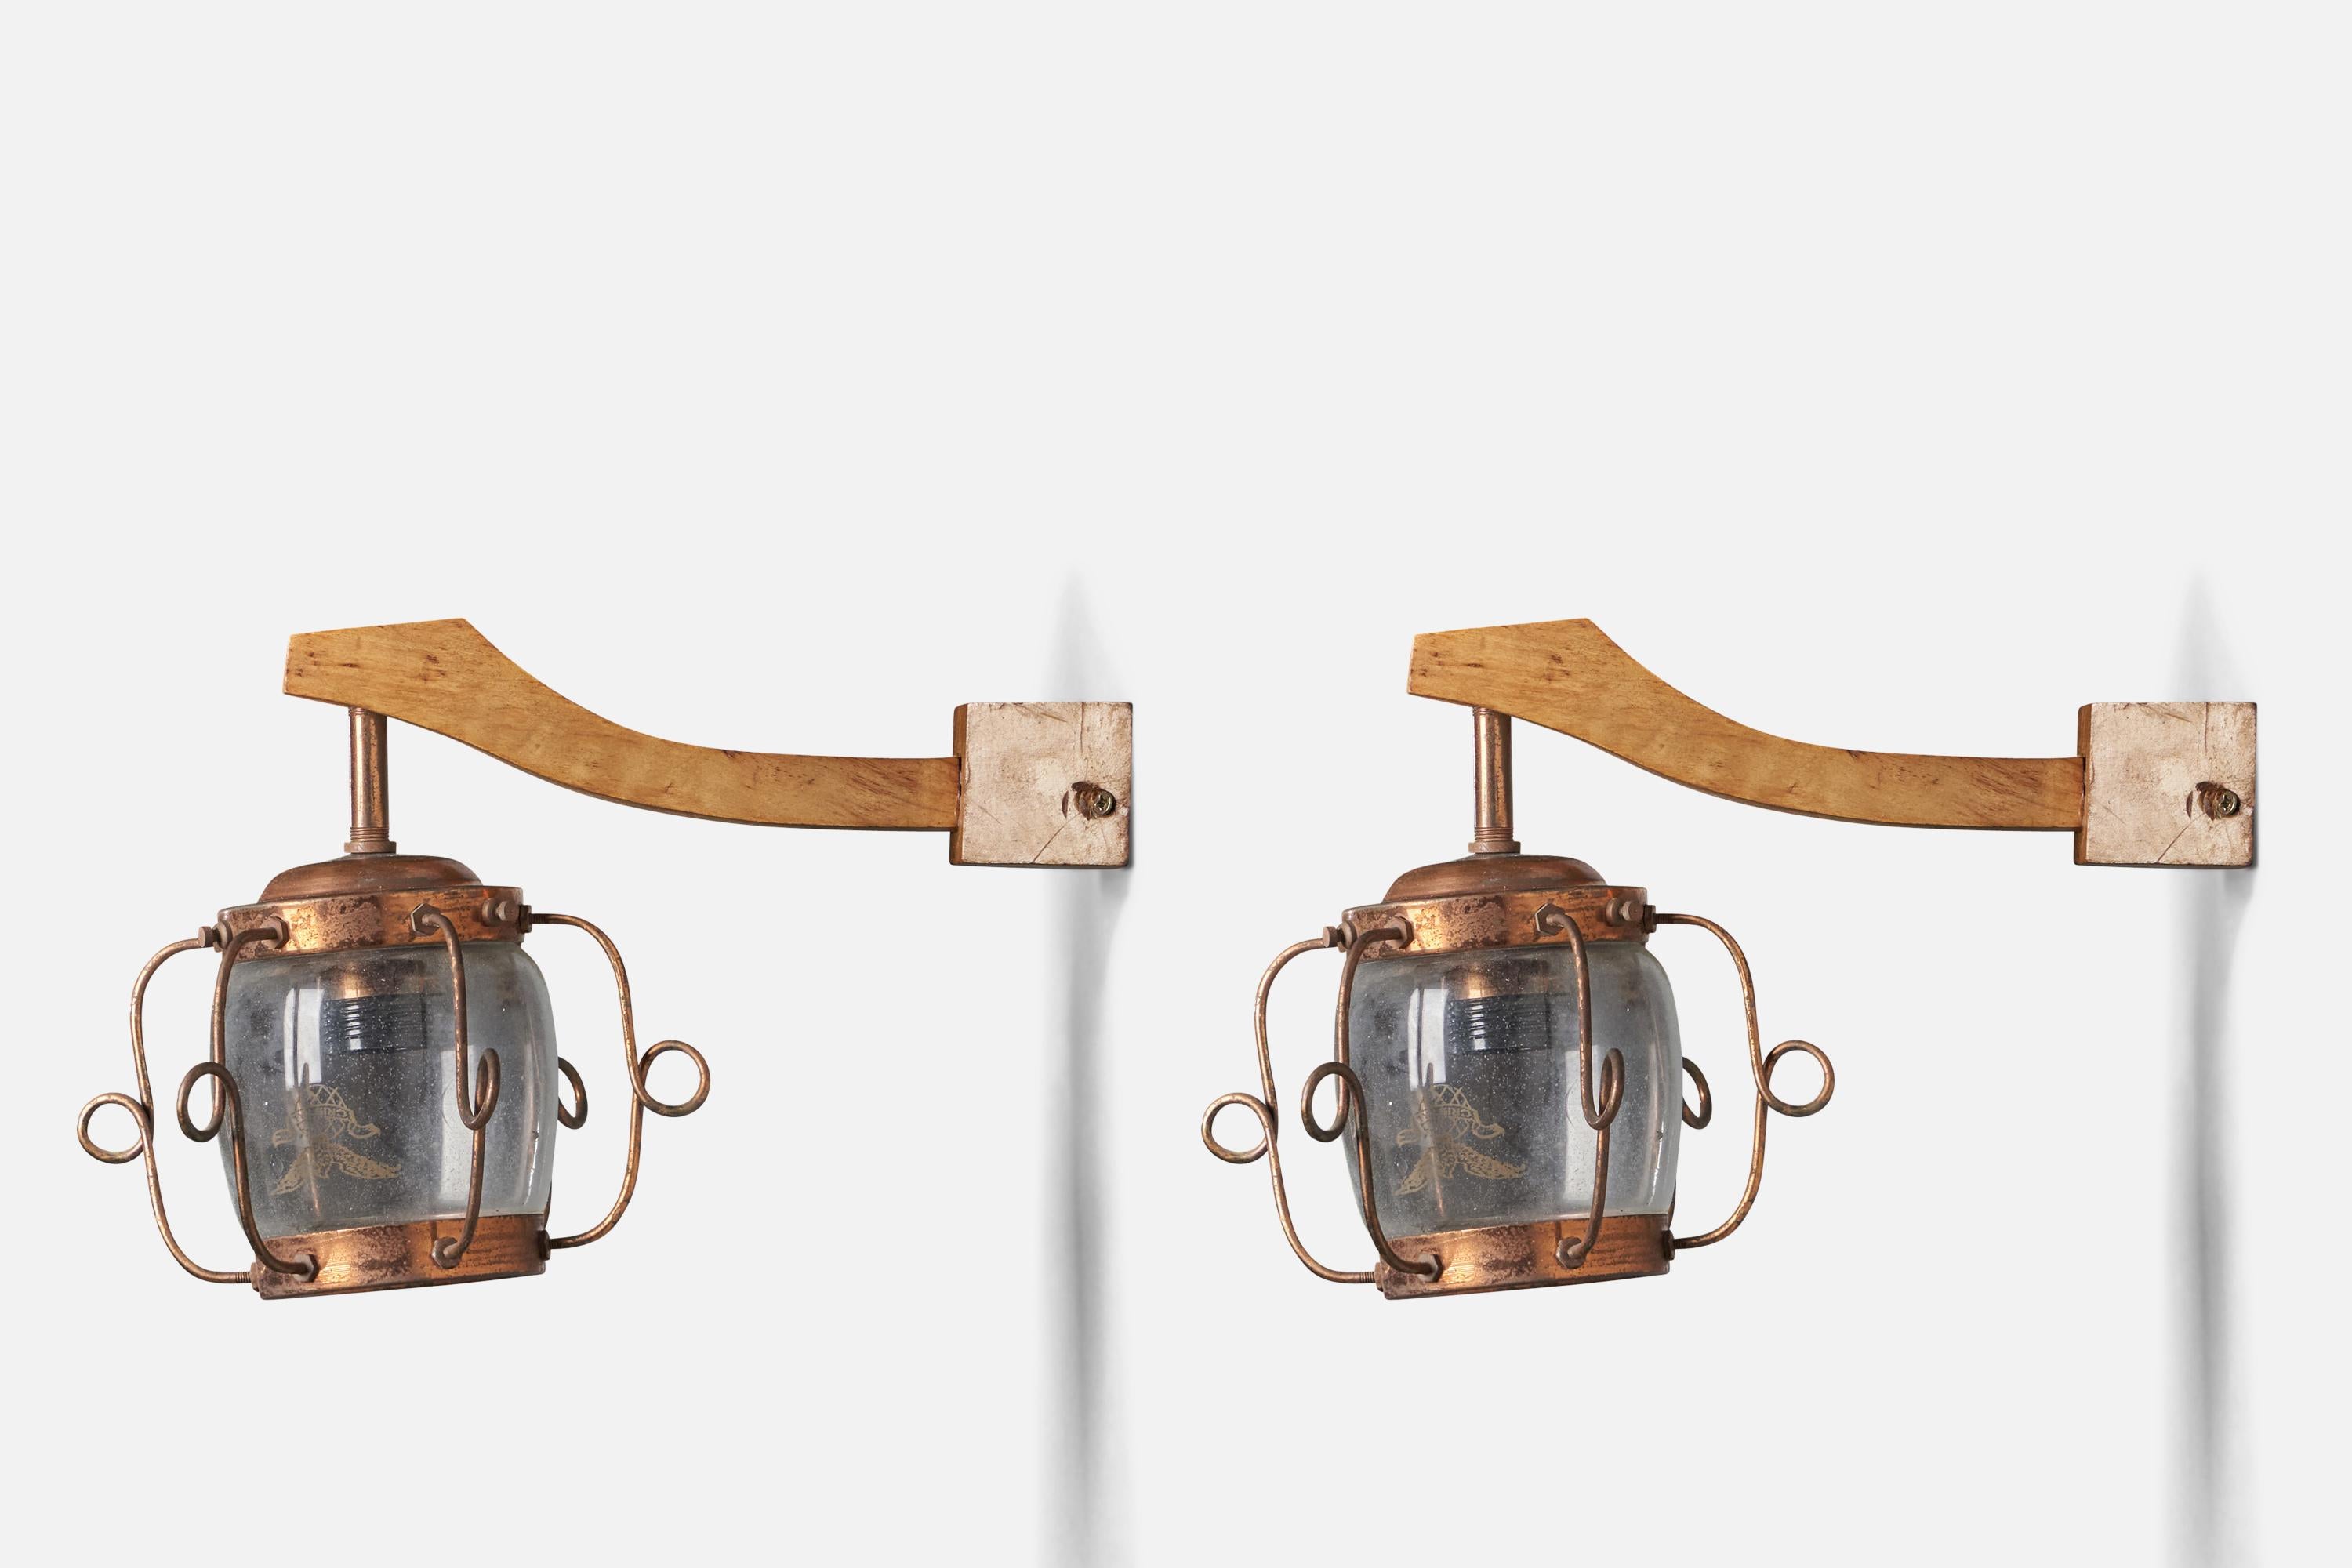 A pair of glass, copper and wood wall lights, design attributed to Aldo Tura, Italy, c. 1930s.

Overall Dimensions (inches): 6.5